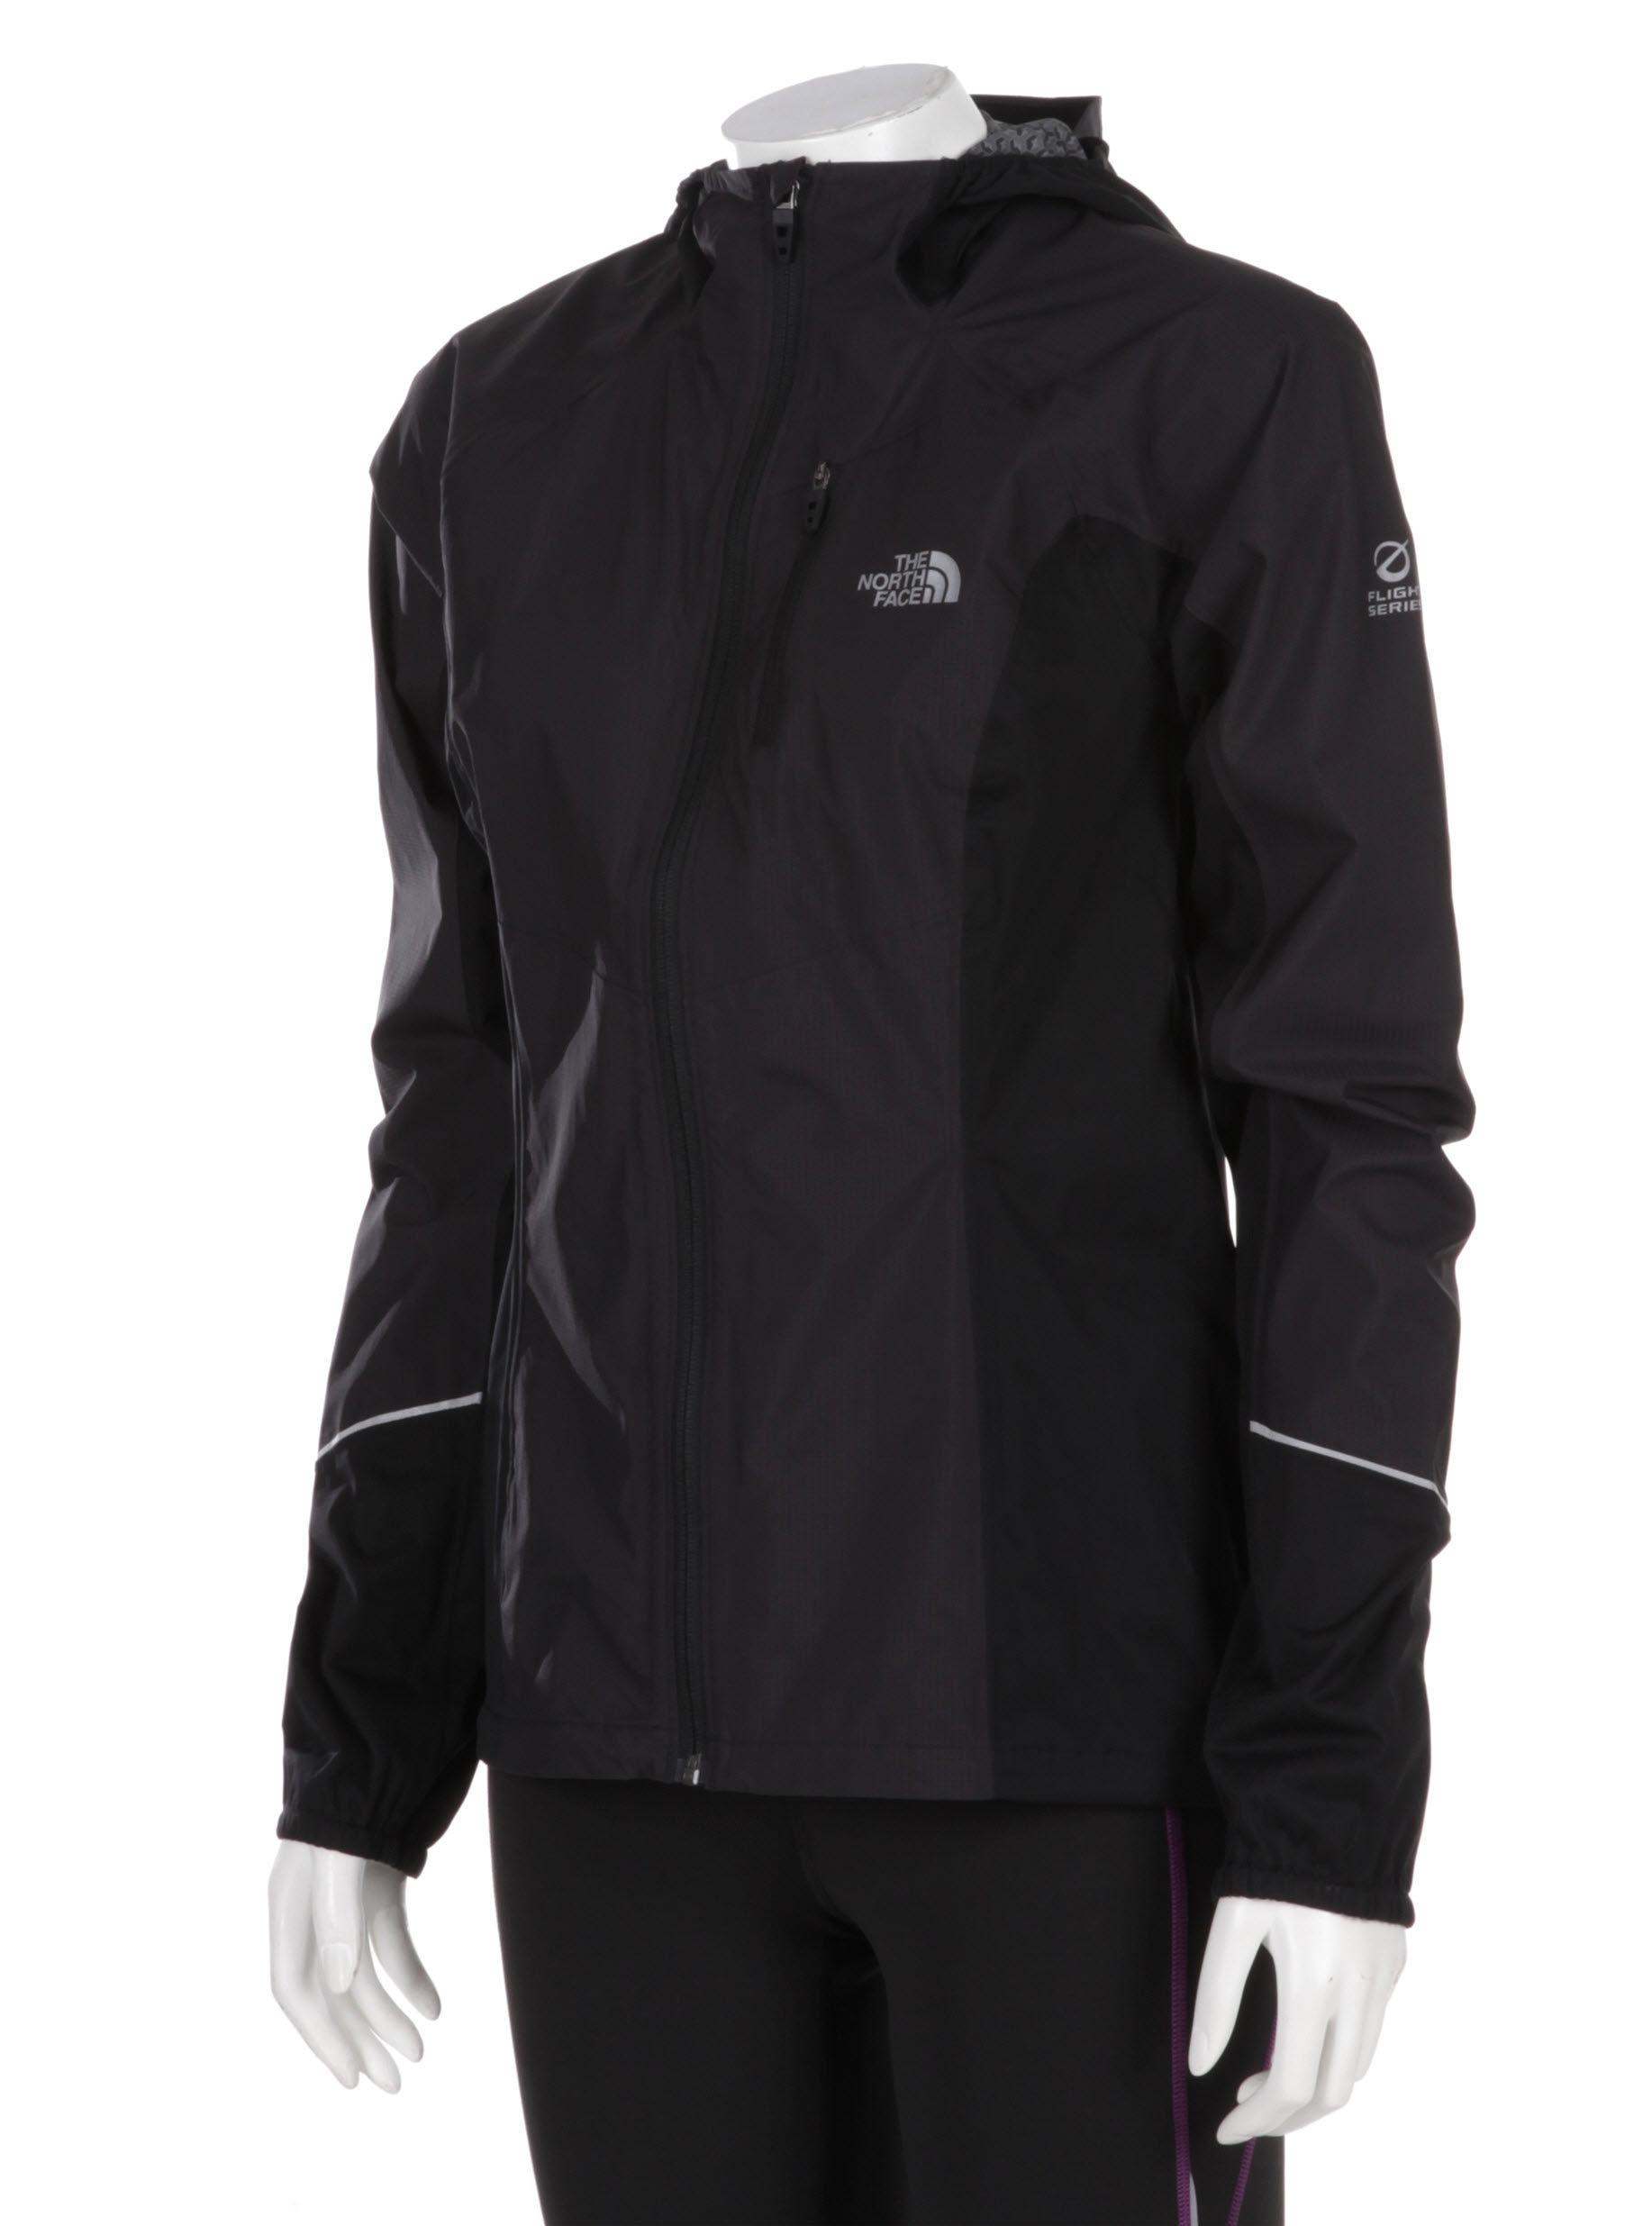 Foto Chaqueta para mujer The North Face - AK Storm Trail - Large TNF Black